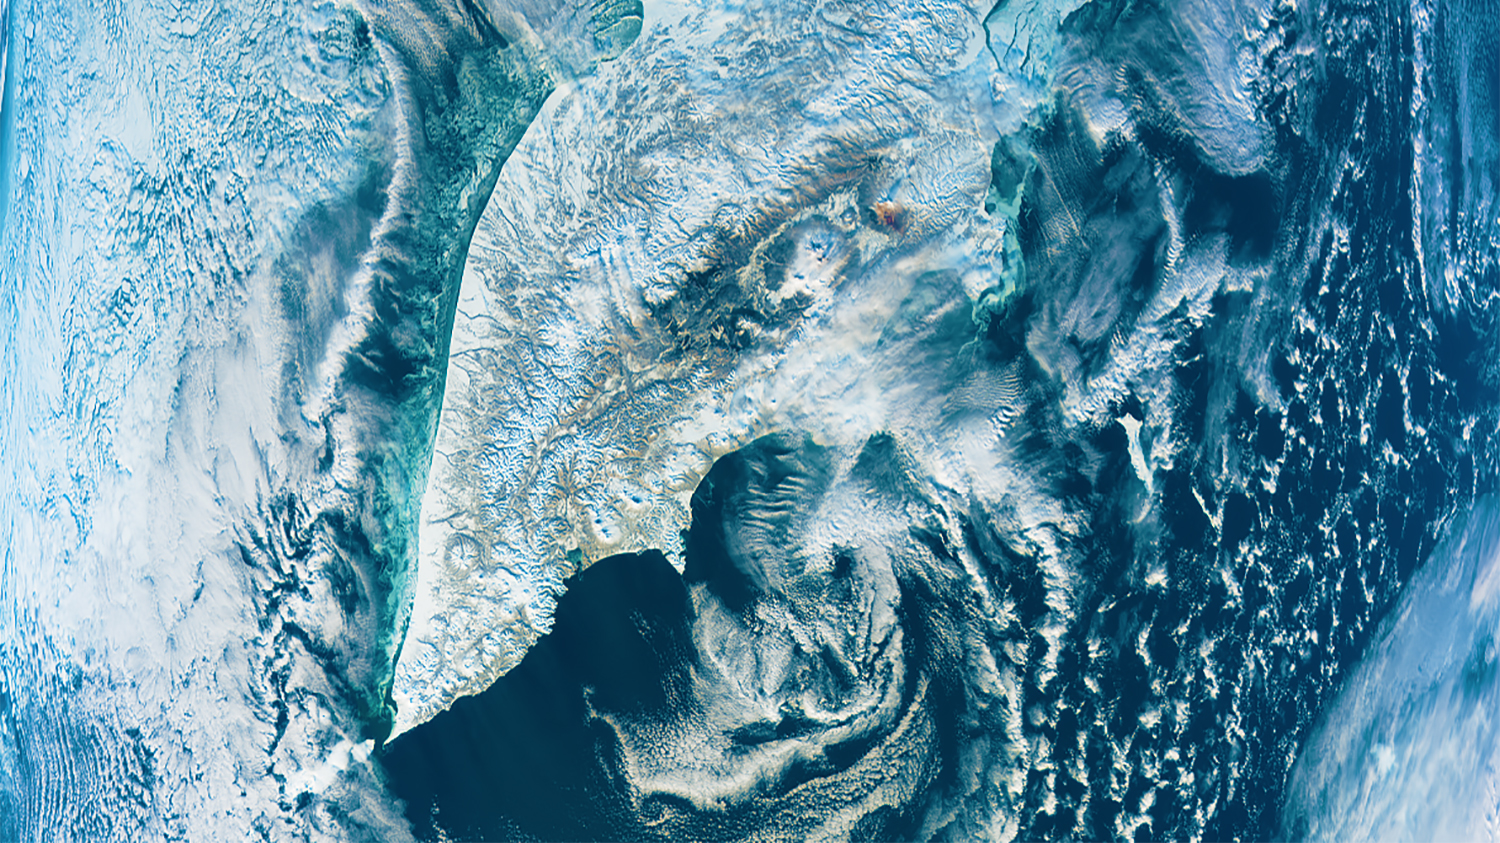 This image depicts the Kamchatka peninsula in Russia, one of the first images from the NASA Plankton, Aerosol, Cloud, and ocean Ecosystem (PACE) mission. Credit: NASA/PACE